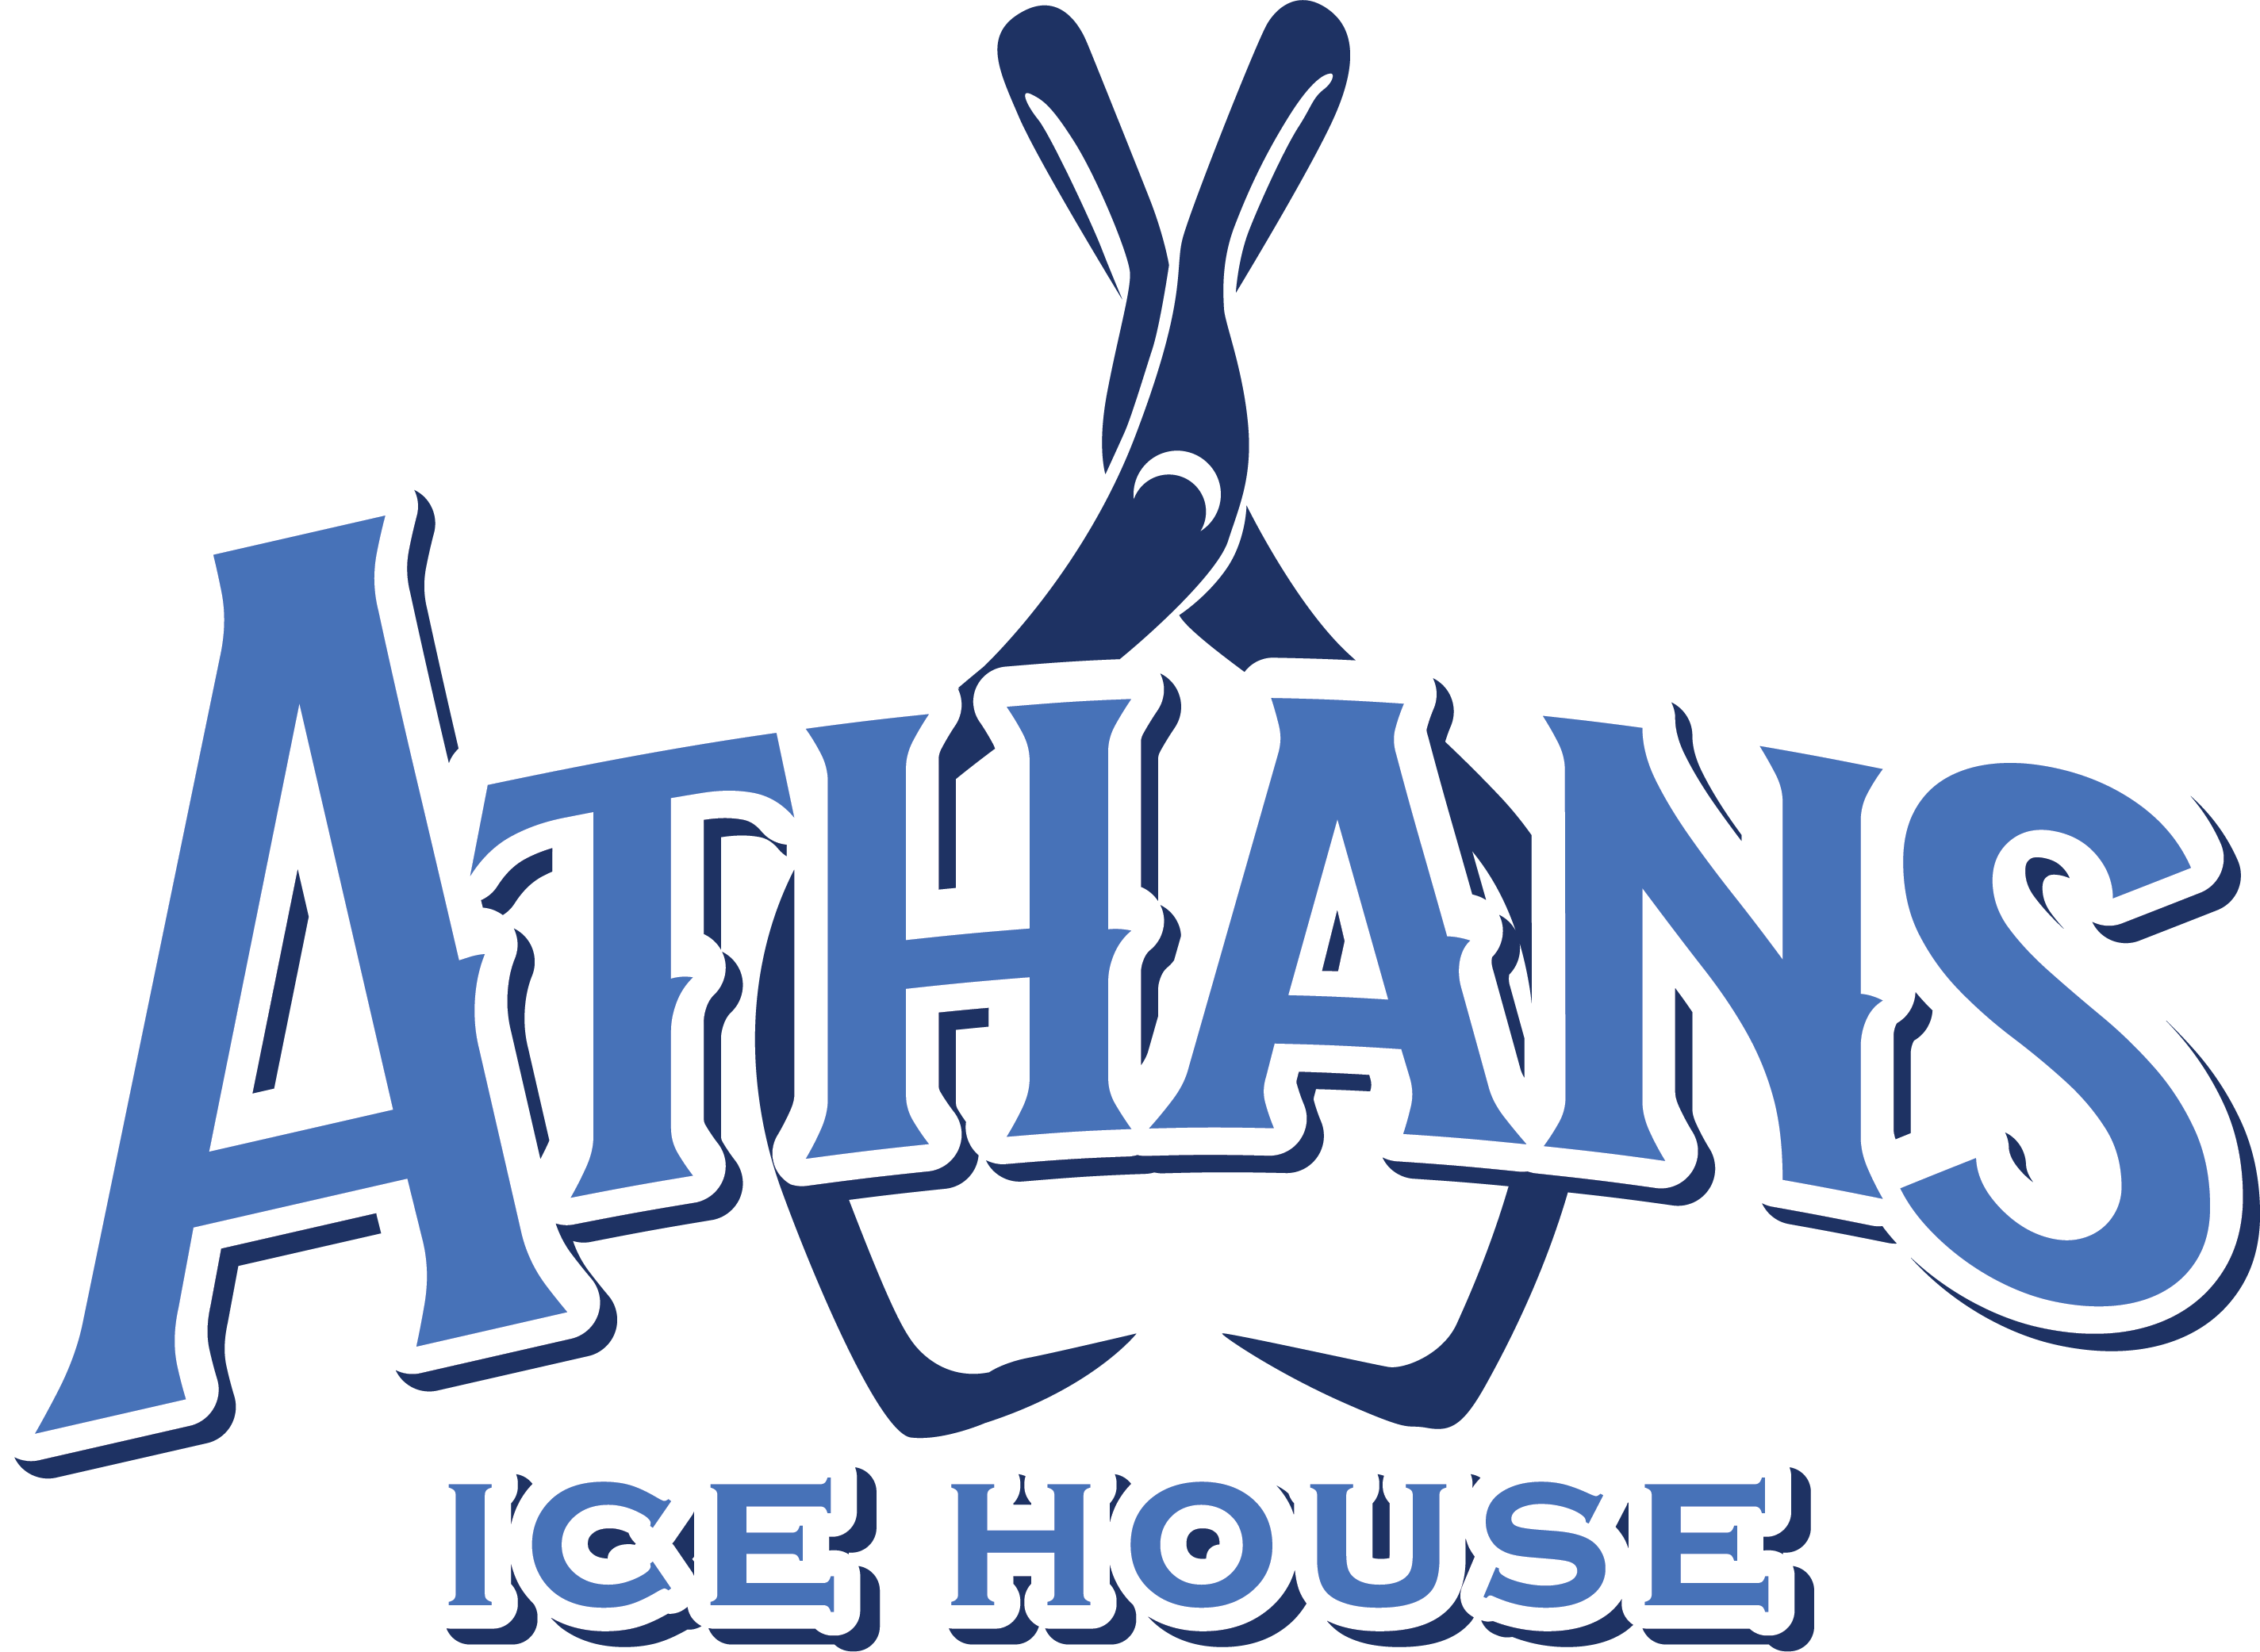 Athans Ice House | Whittier, CA